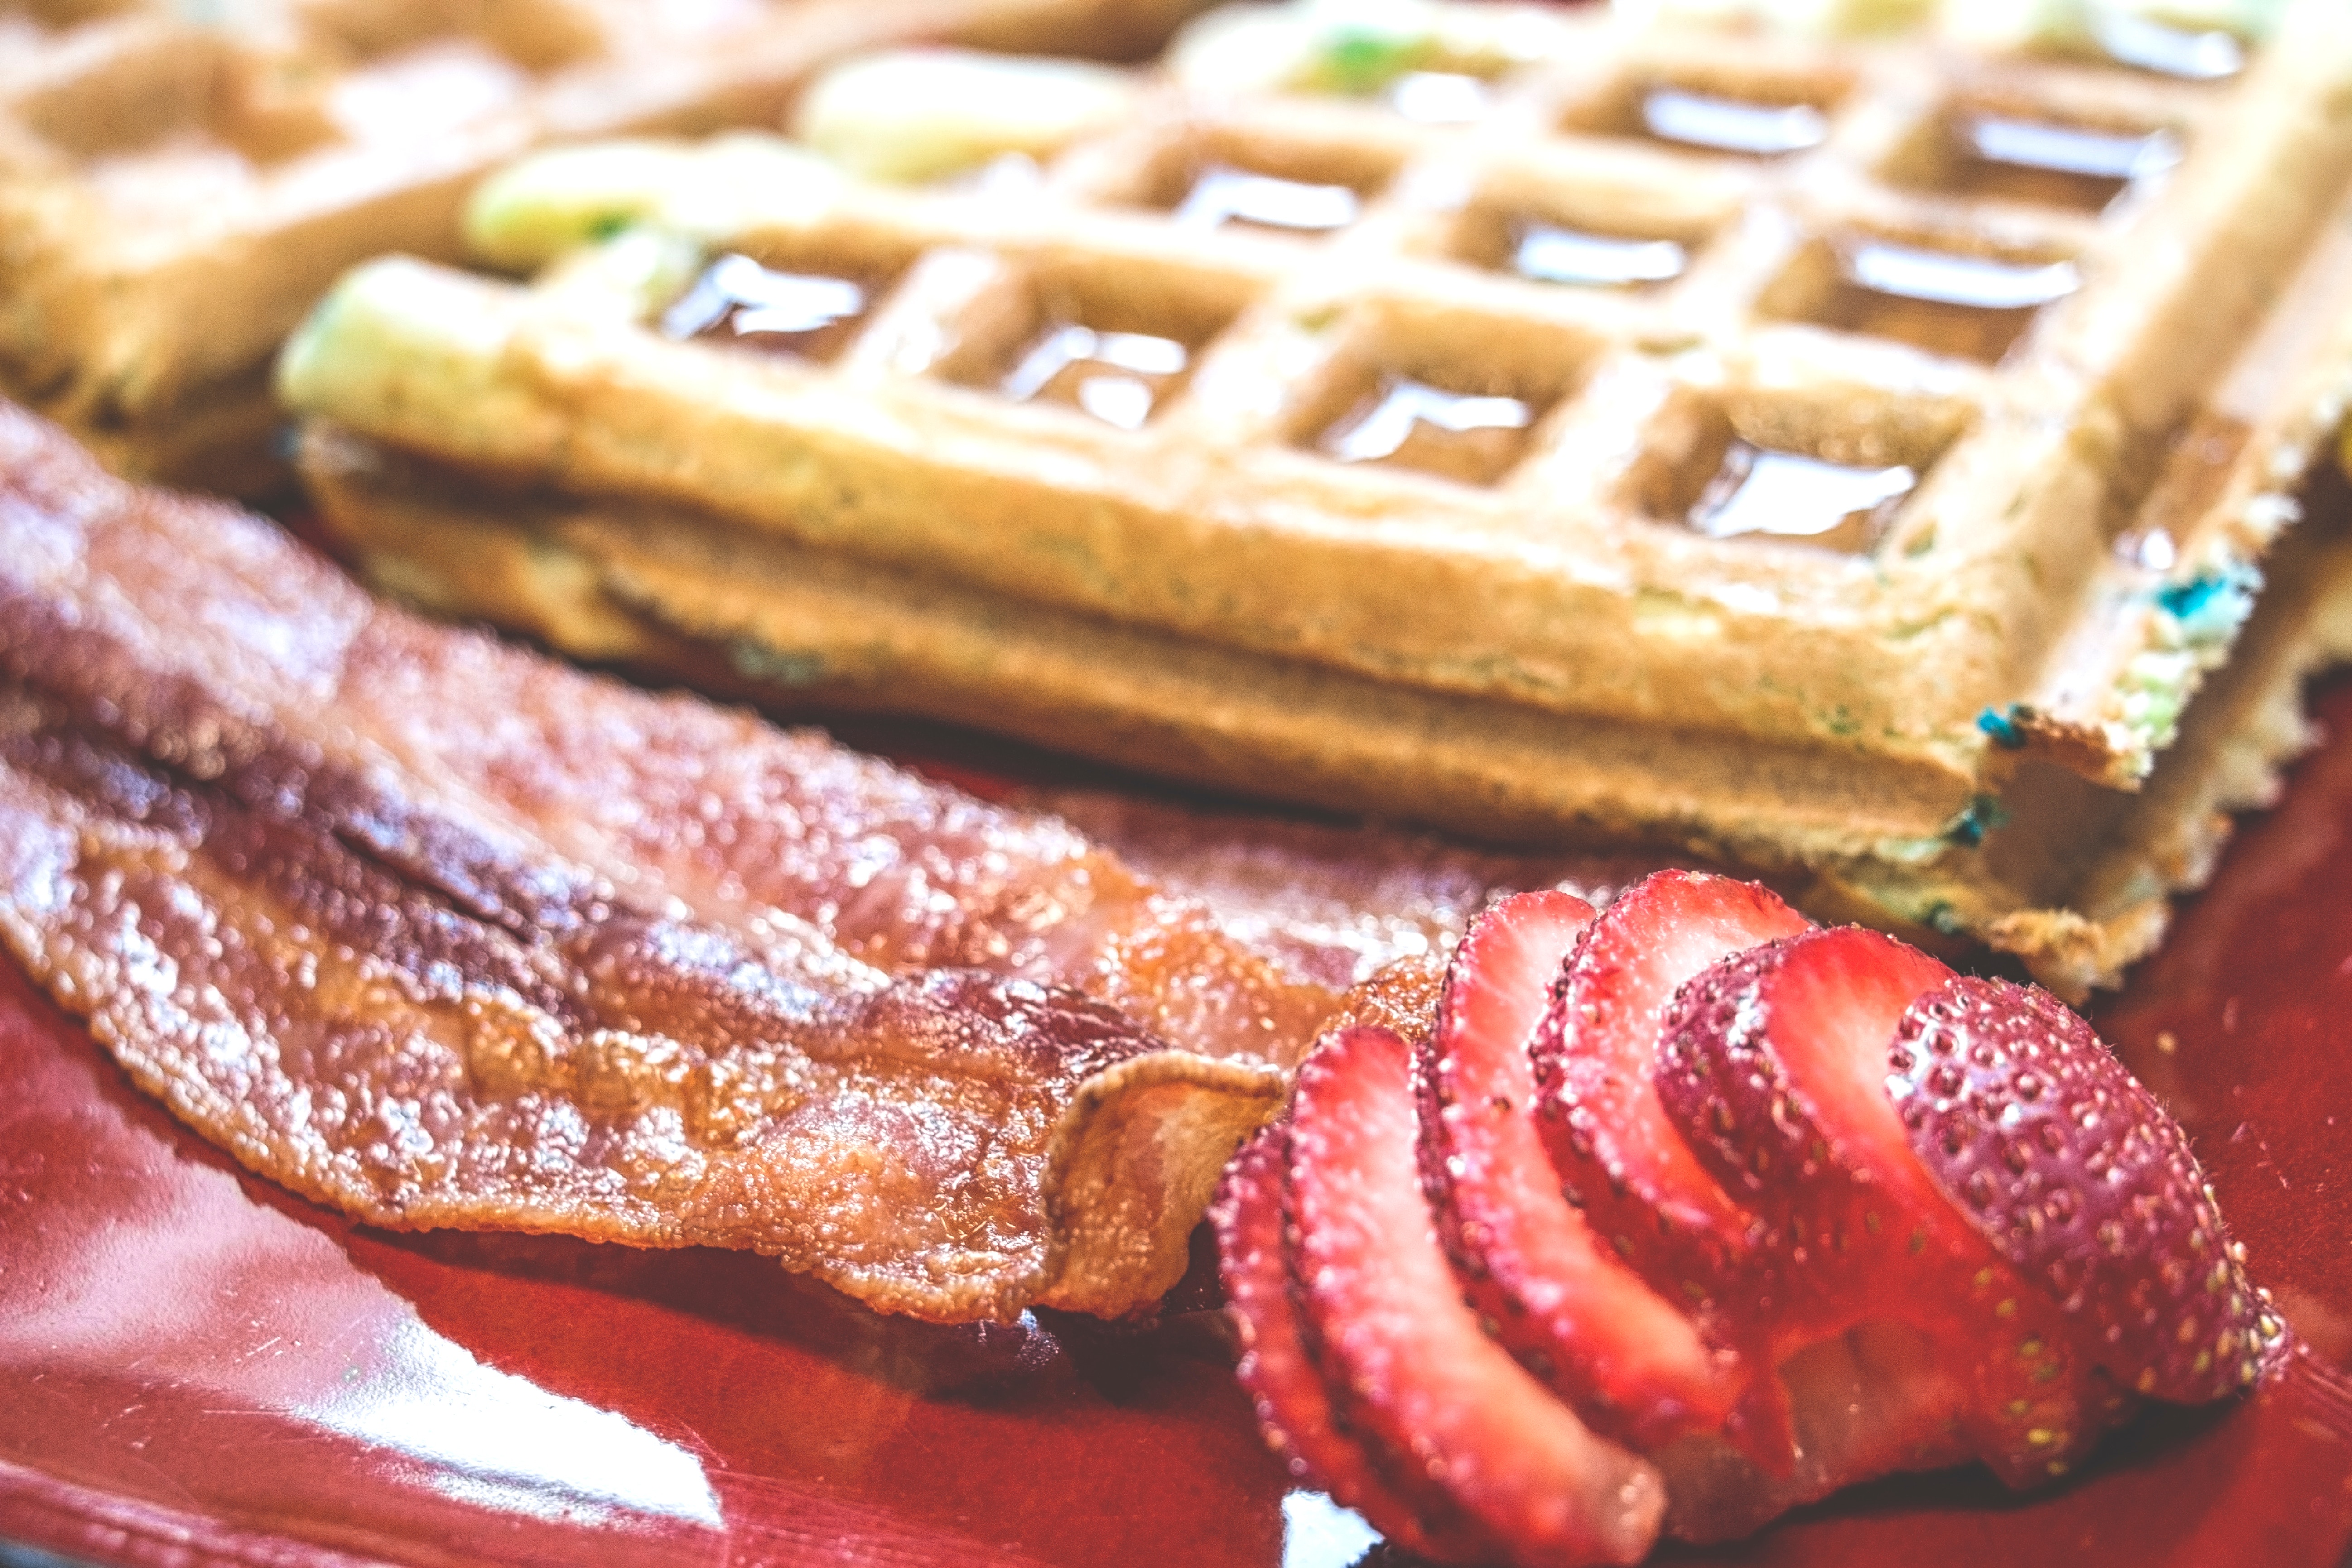 124588 download wallpaper food, strawberry, waffles, breakfast, bacon screensavers and pictures for free